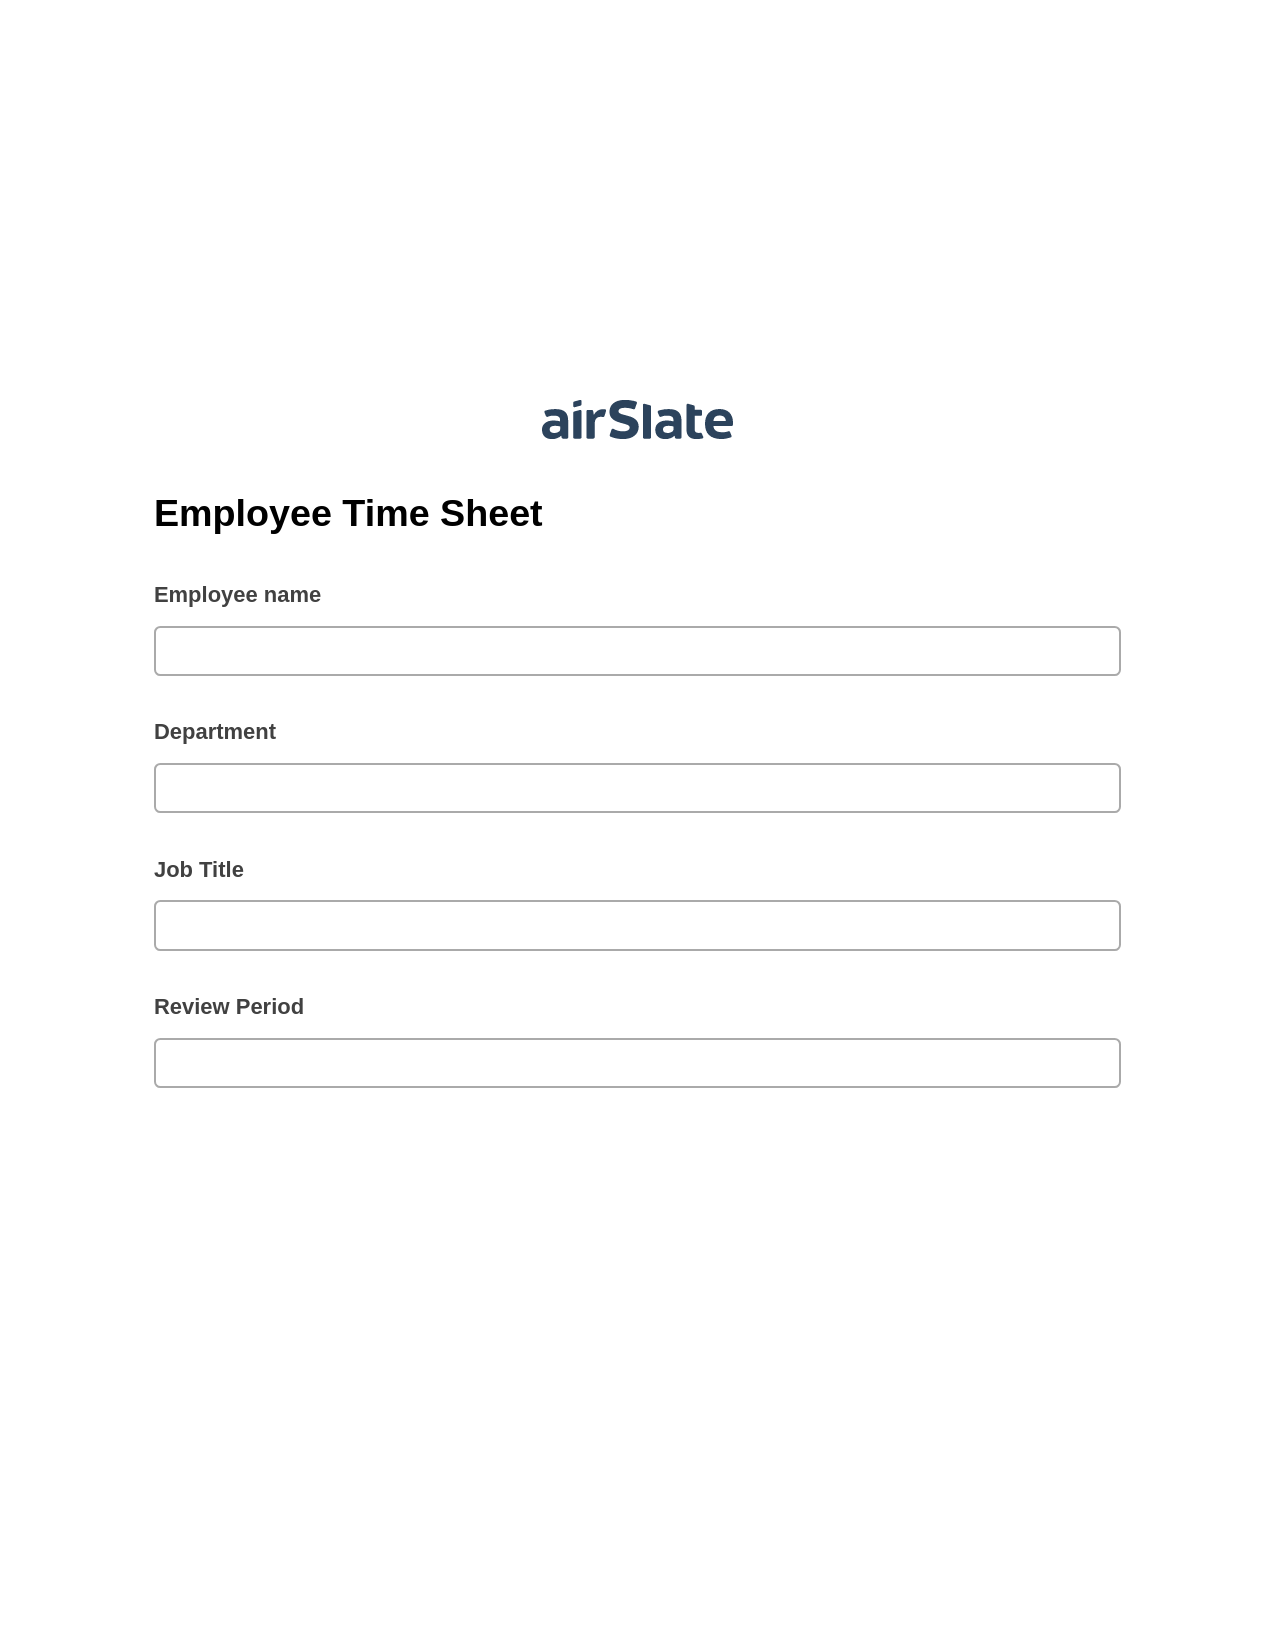 Employee Time Sheet Pre-fill from another Slate Bot, SendGrid send Campaign bot, Archive to Google Drive Bot